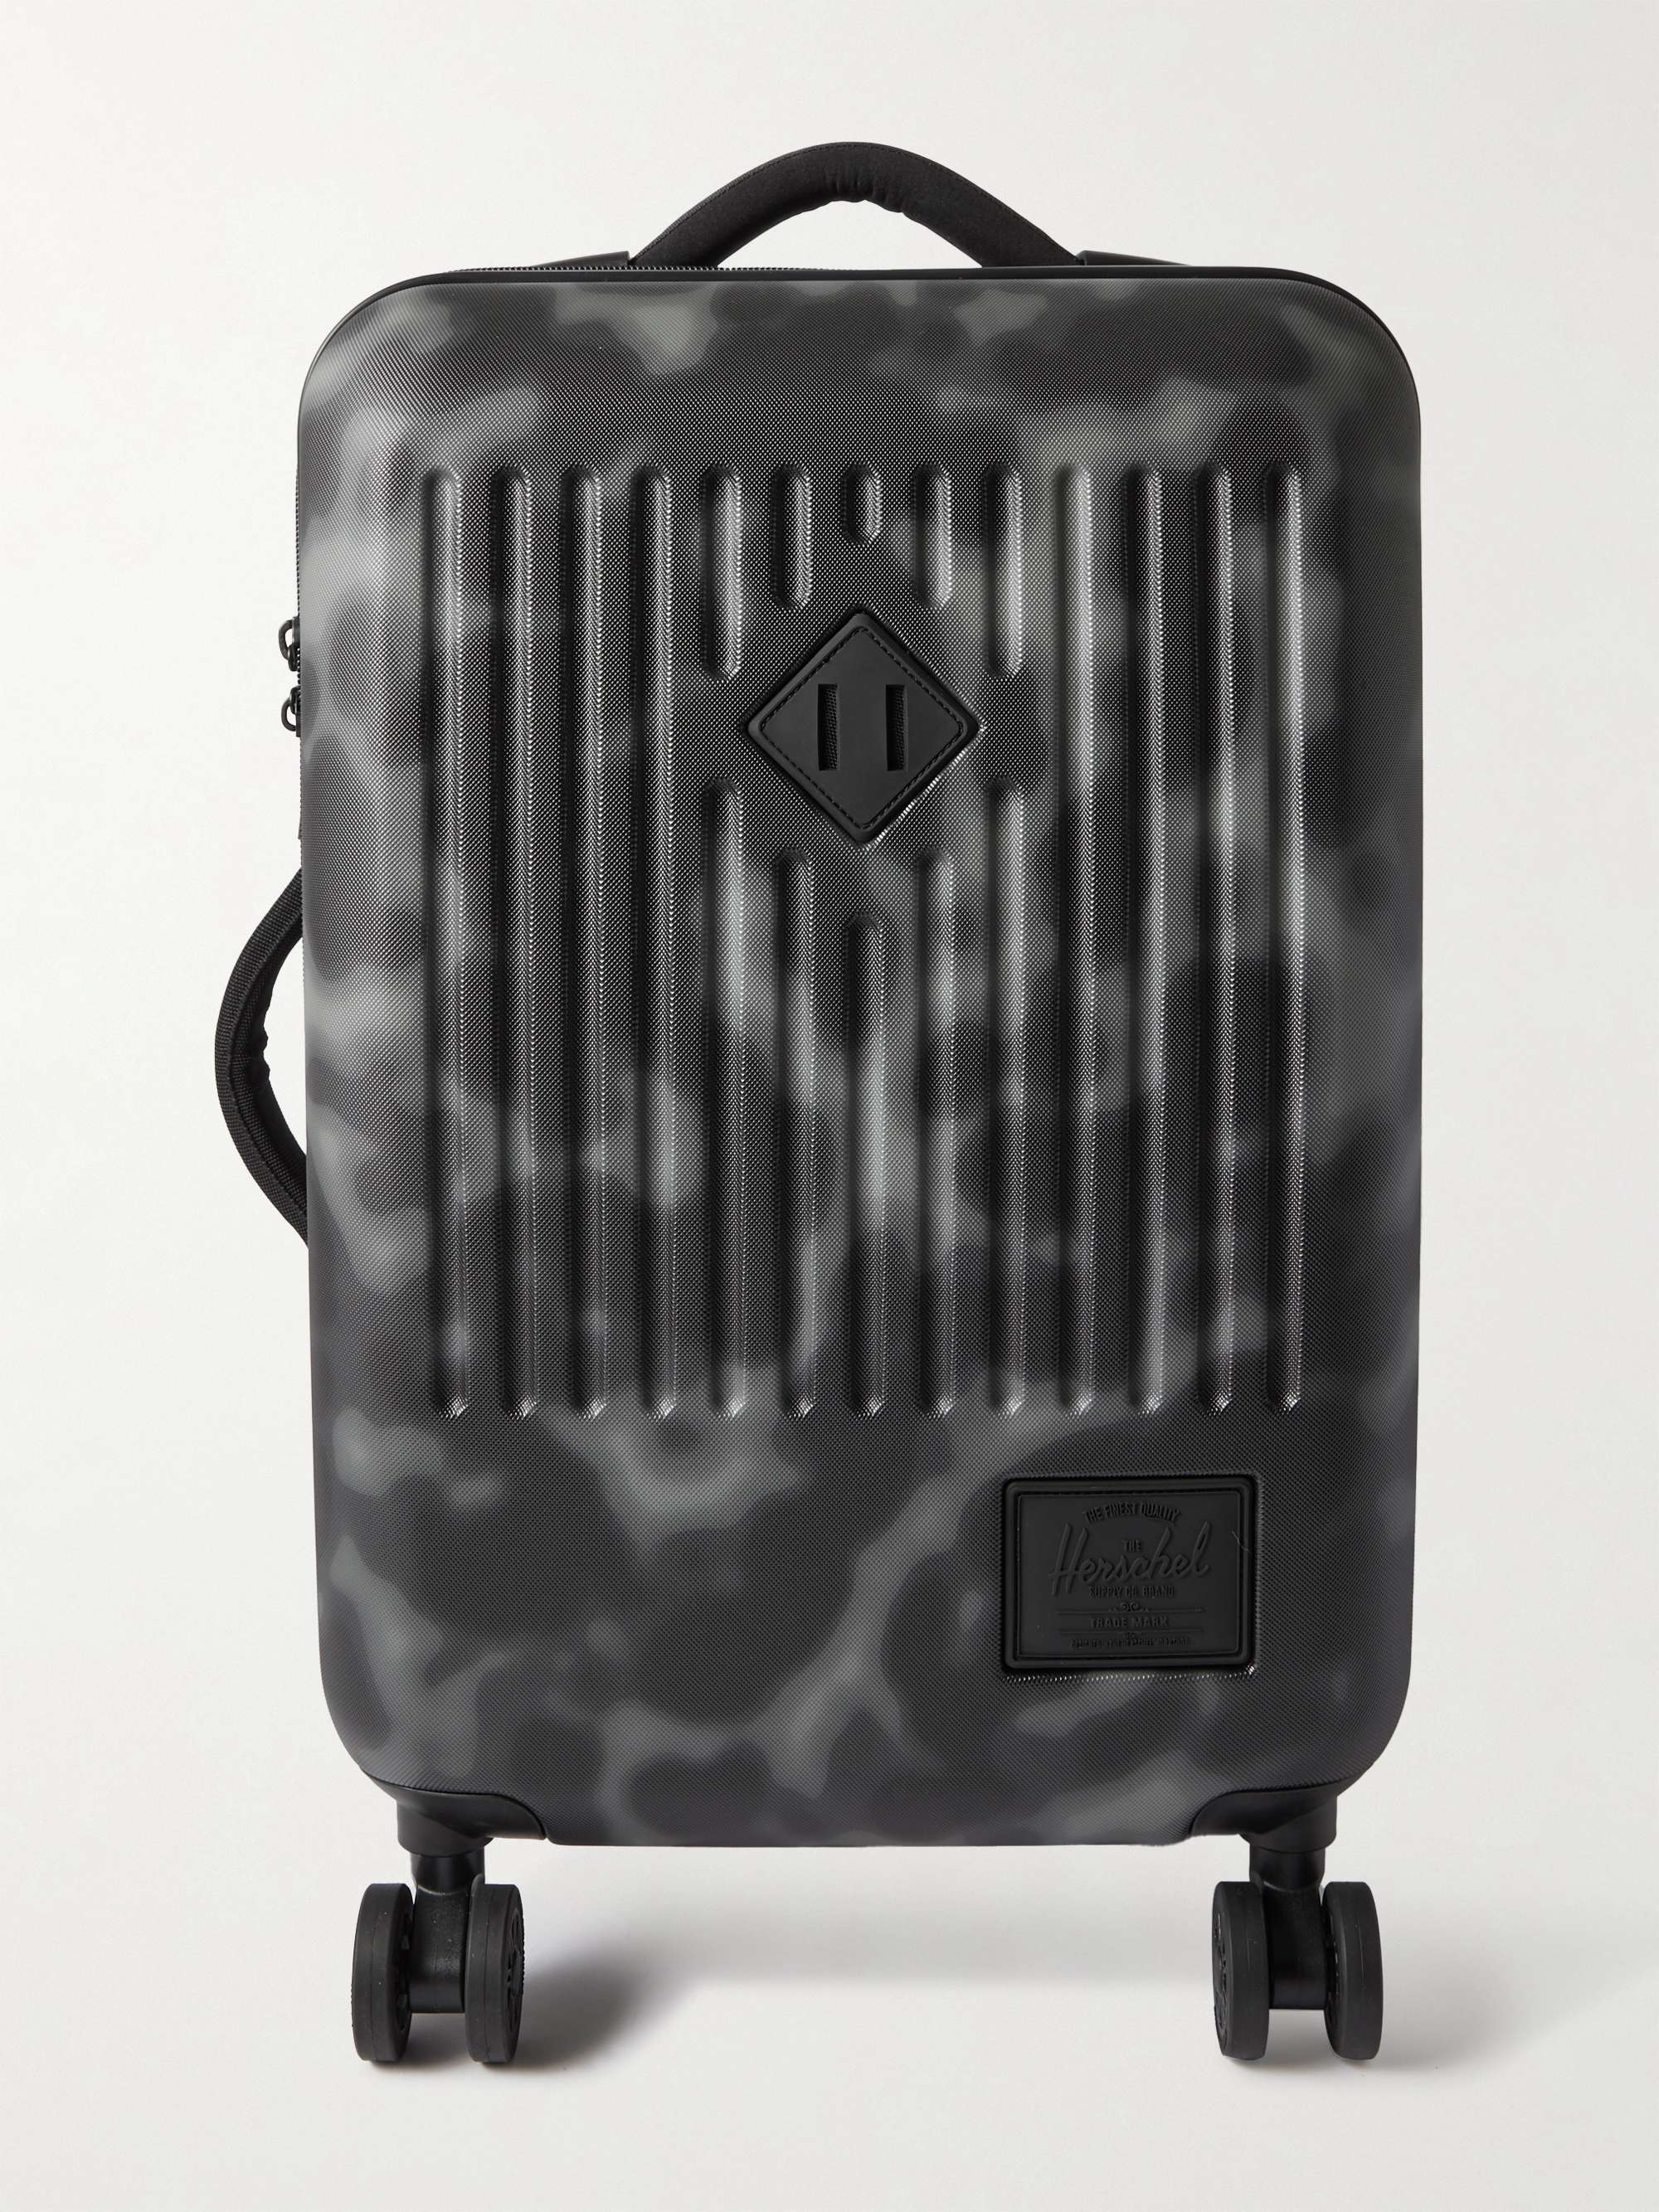 HERSCHEL SUPPLY CO. Trade Large Carry-On Suitcase | MR PORTER